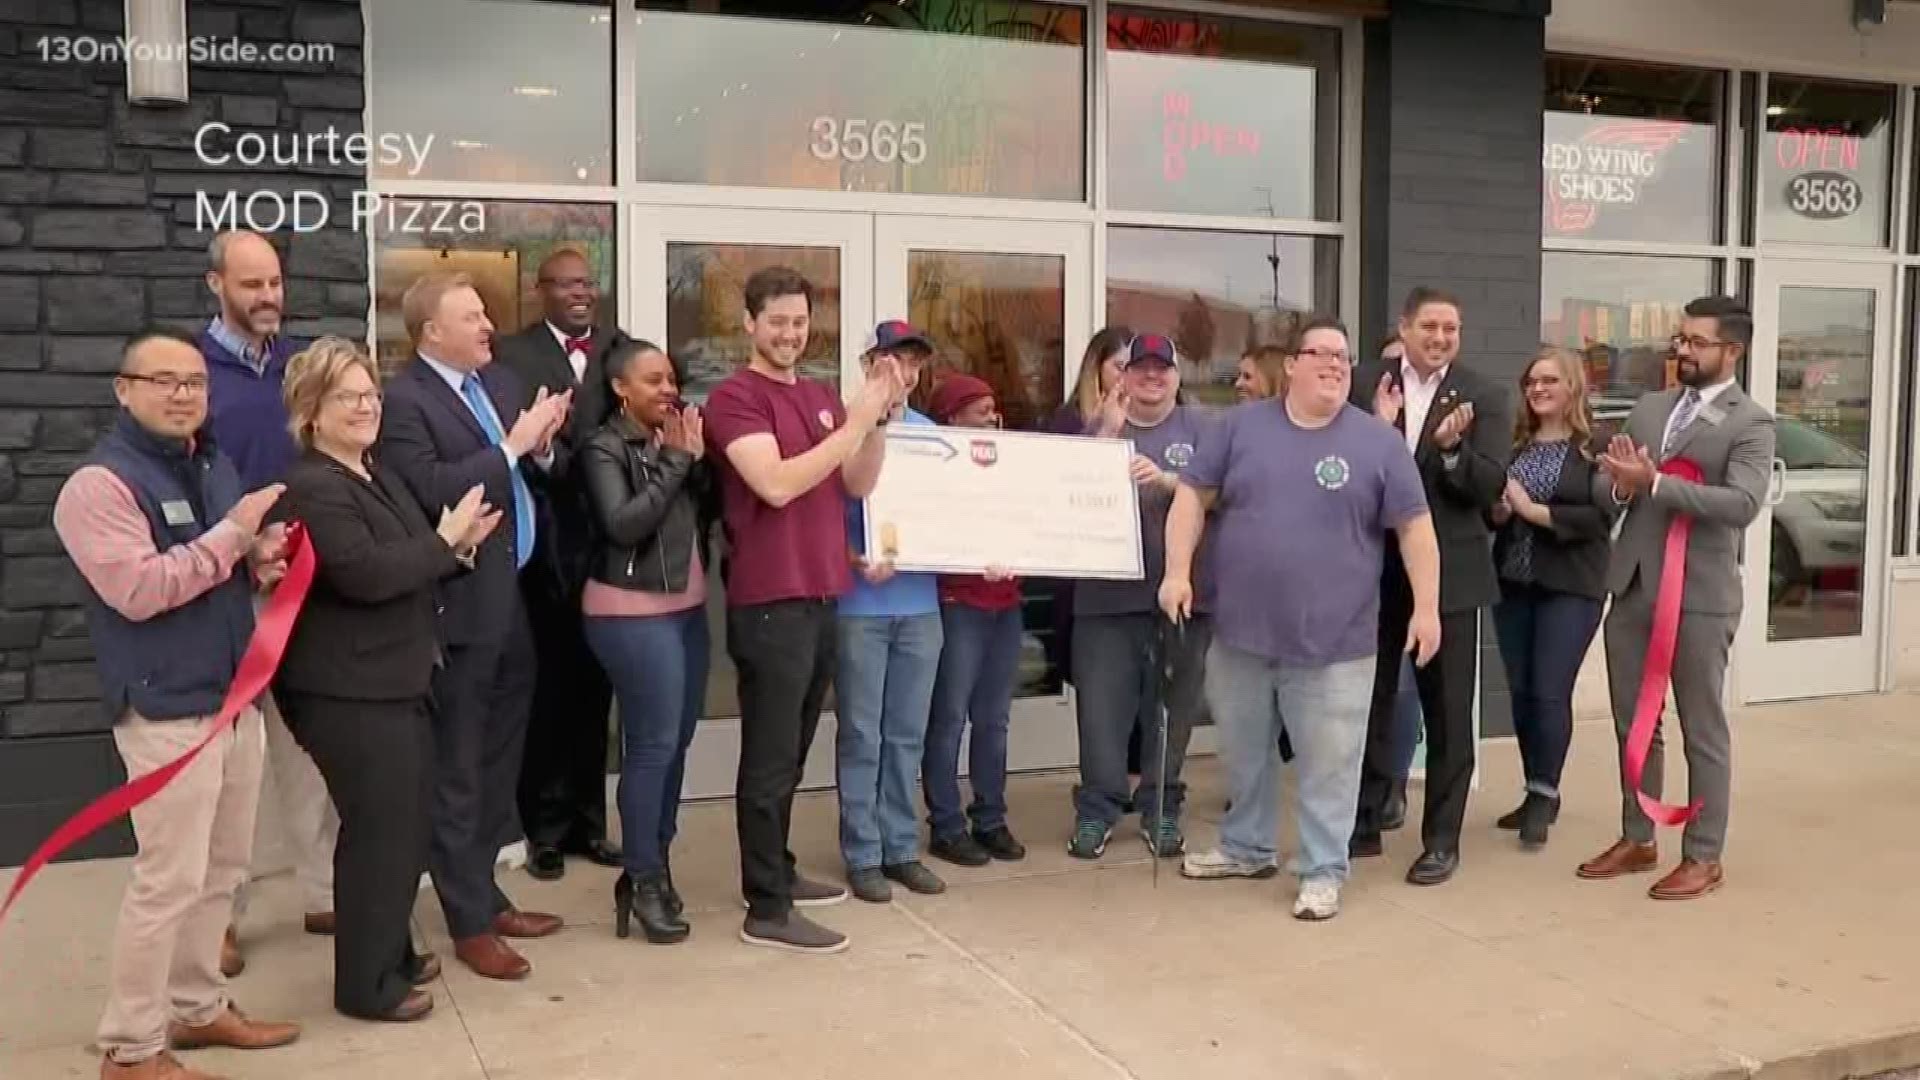 They raised $3,000 during a "pay what you can" day.